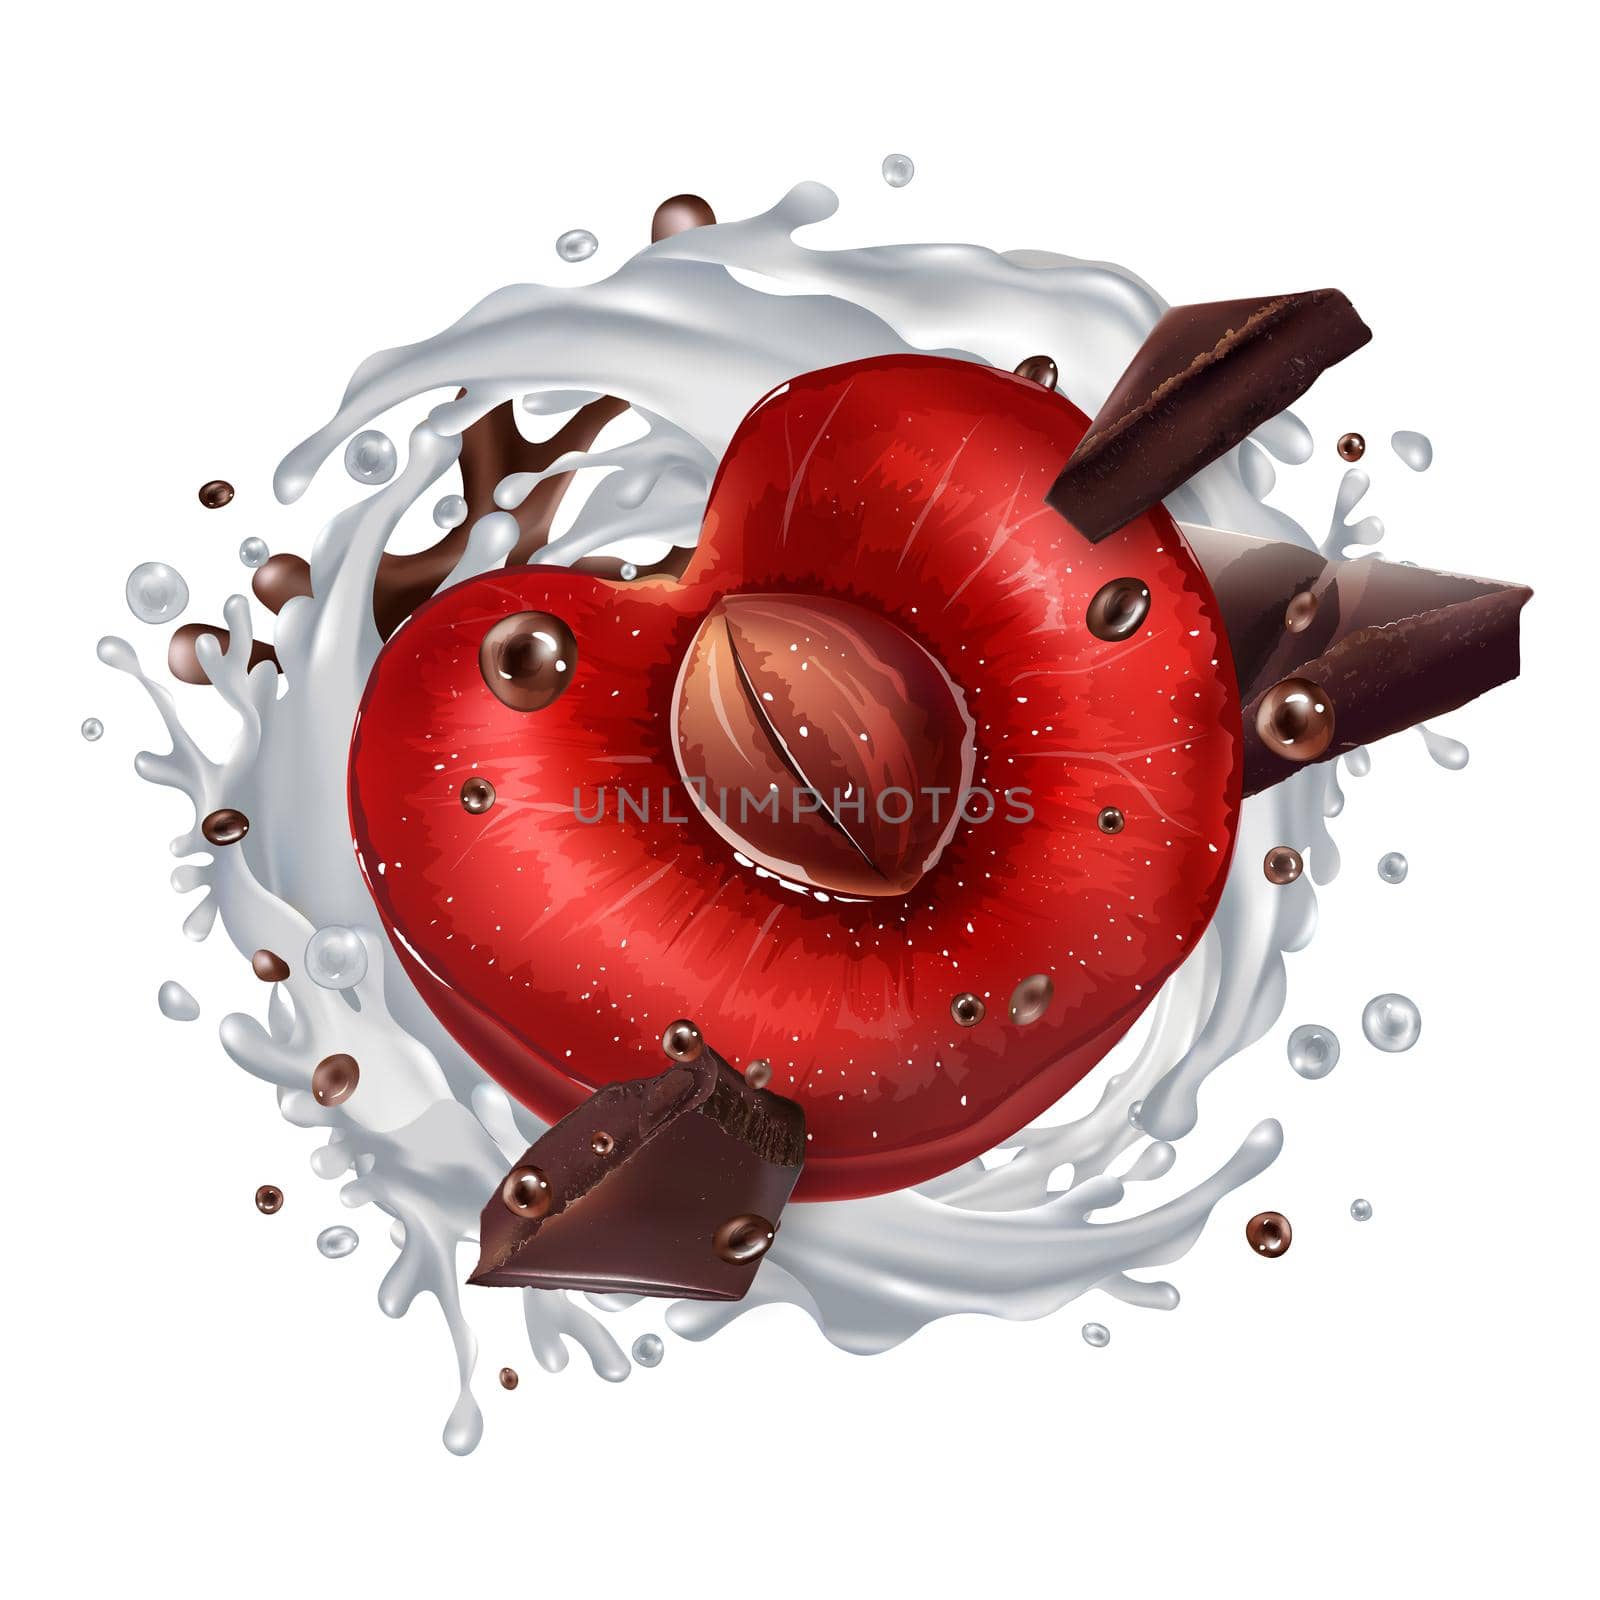 Cherry, pieces of dark chocolate and a splash of milk. Realistic style illustration.